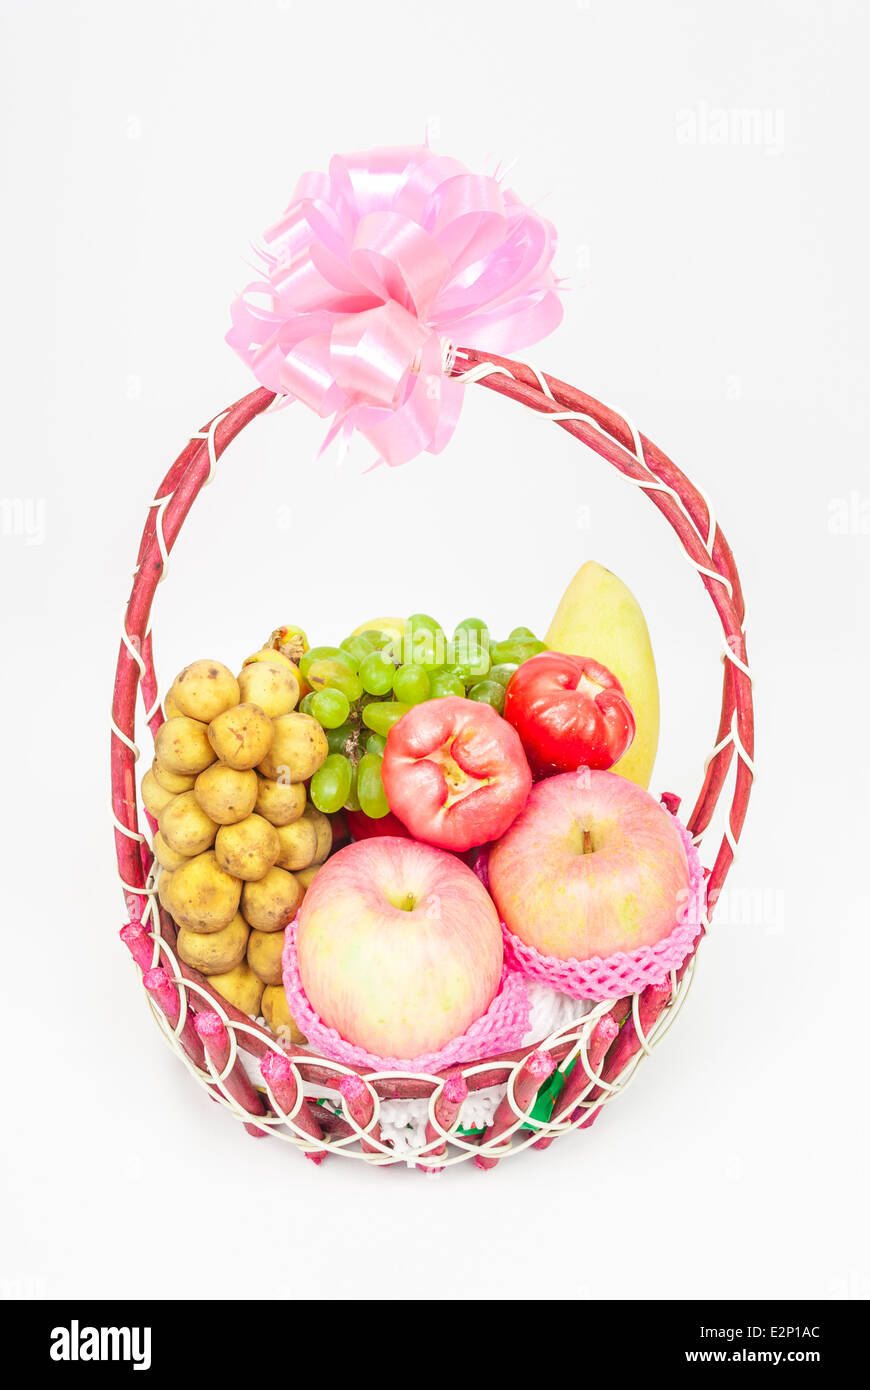 Rattan Basket of Fruits with Ribbon Bow. Stock Photo